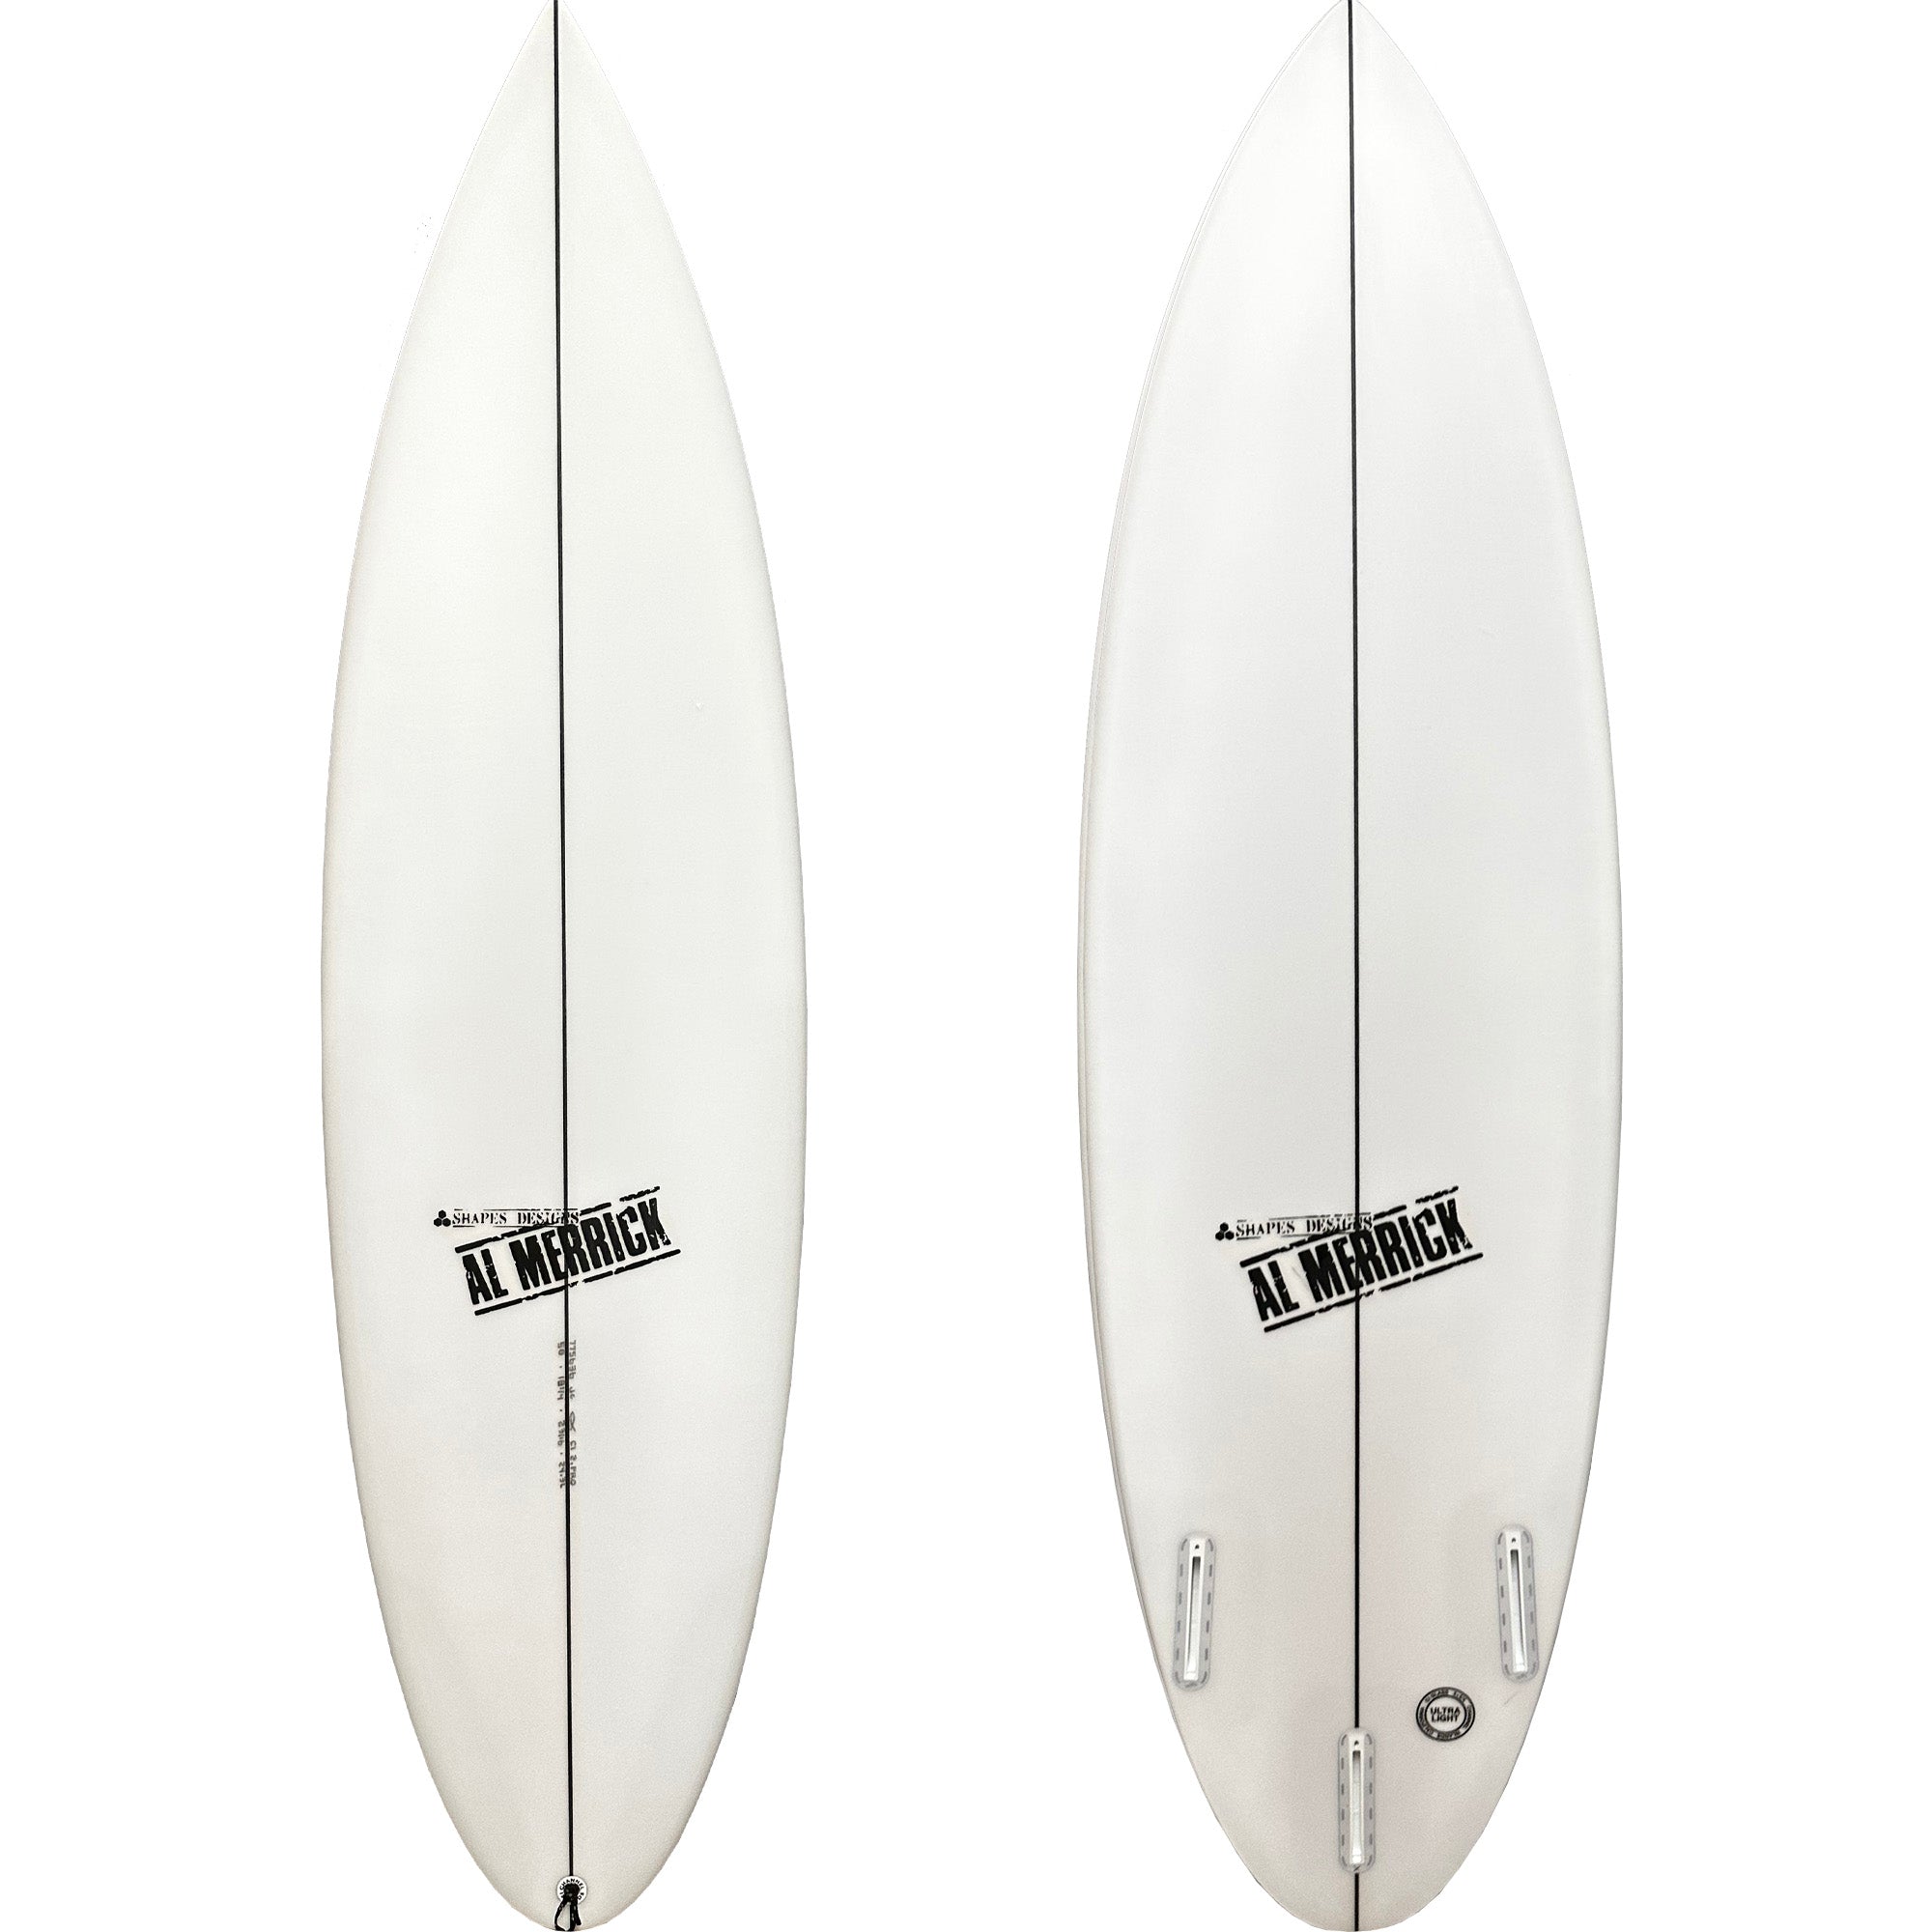 Channel Islands CI 2.Pro Round Surfboard - Futures